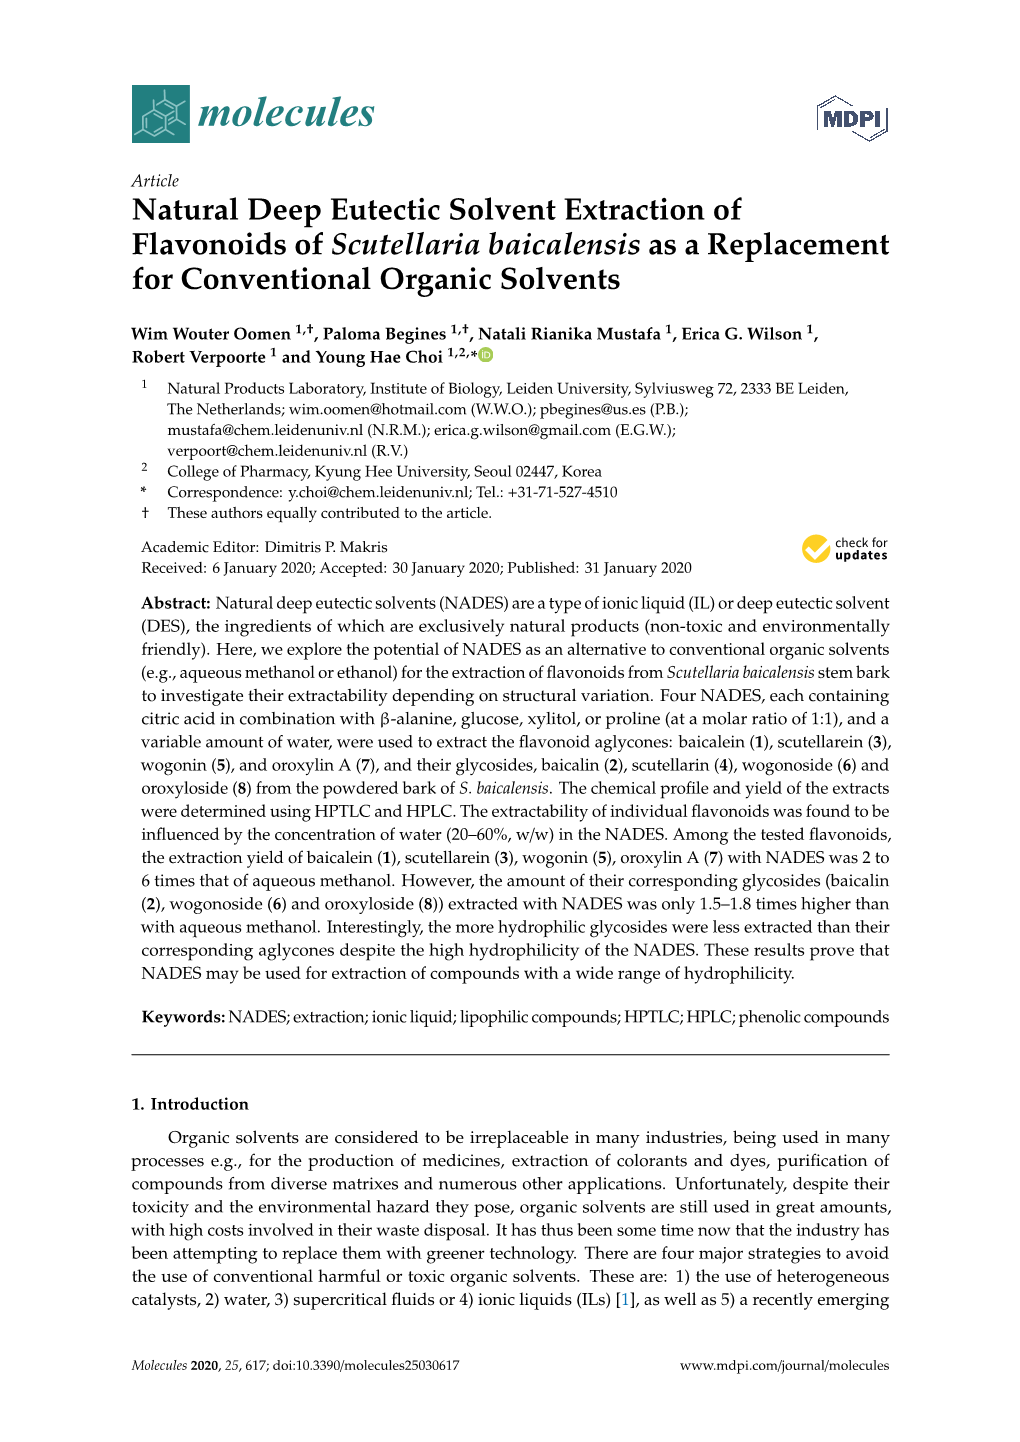 Natural Deep Eutectic Solvent Extraction of Flavonoids of Scutellaria Baicalensis As a Replacement for Conventional Organic Solvents